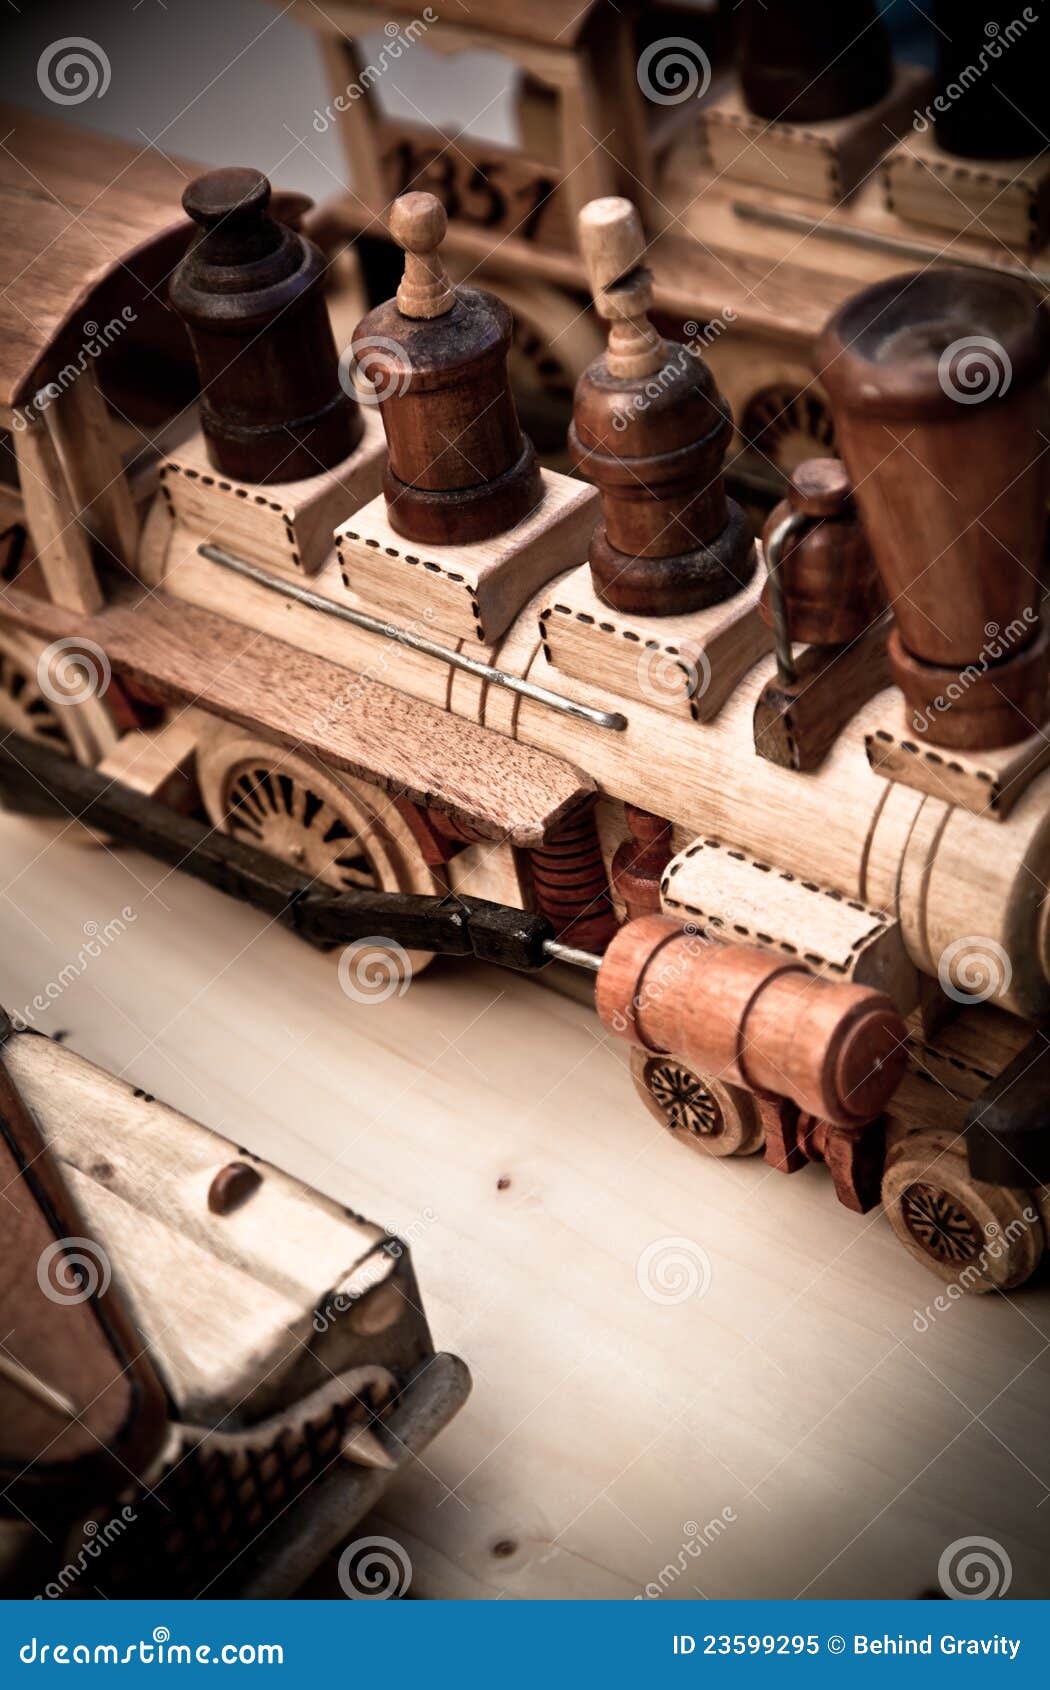 Handmade wooden toy trains stock image. Image of vehicle 